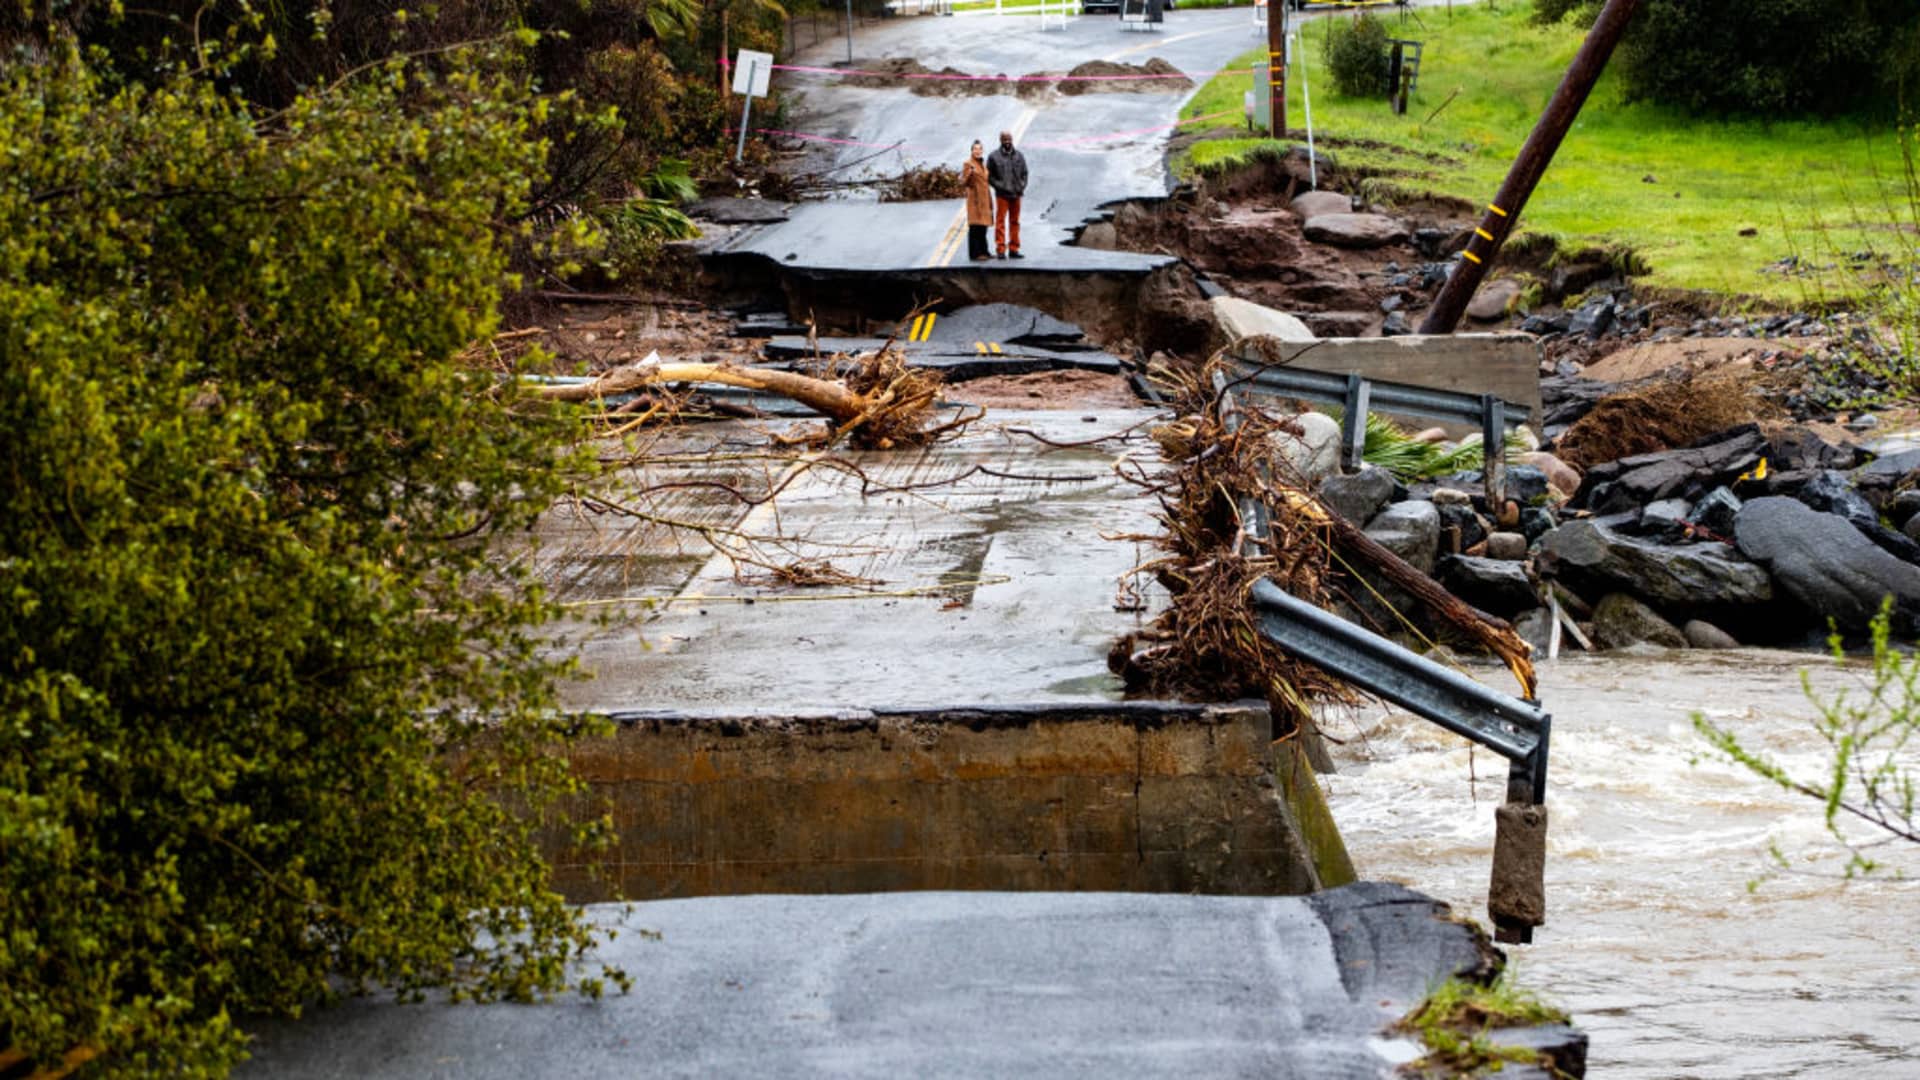 Residents checkout the damage after the fast moving and swollen Tulare River crumbled parts of Globe Drive on March 14, 2023 in Springville, California.